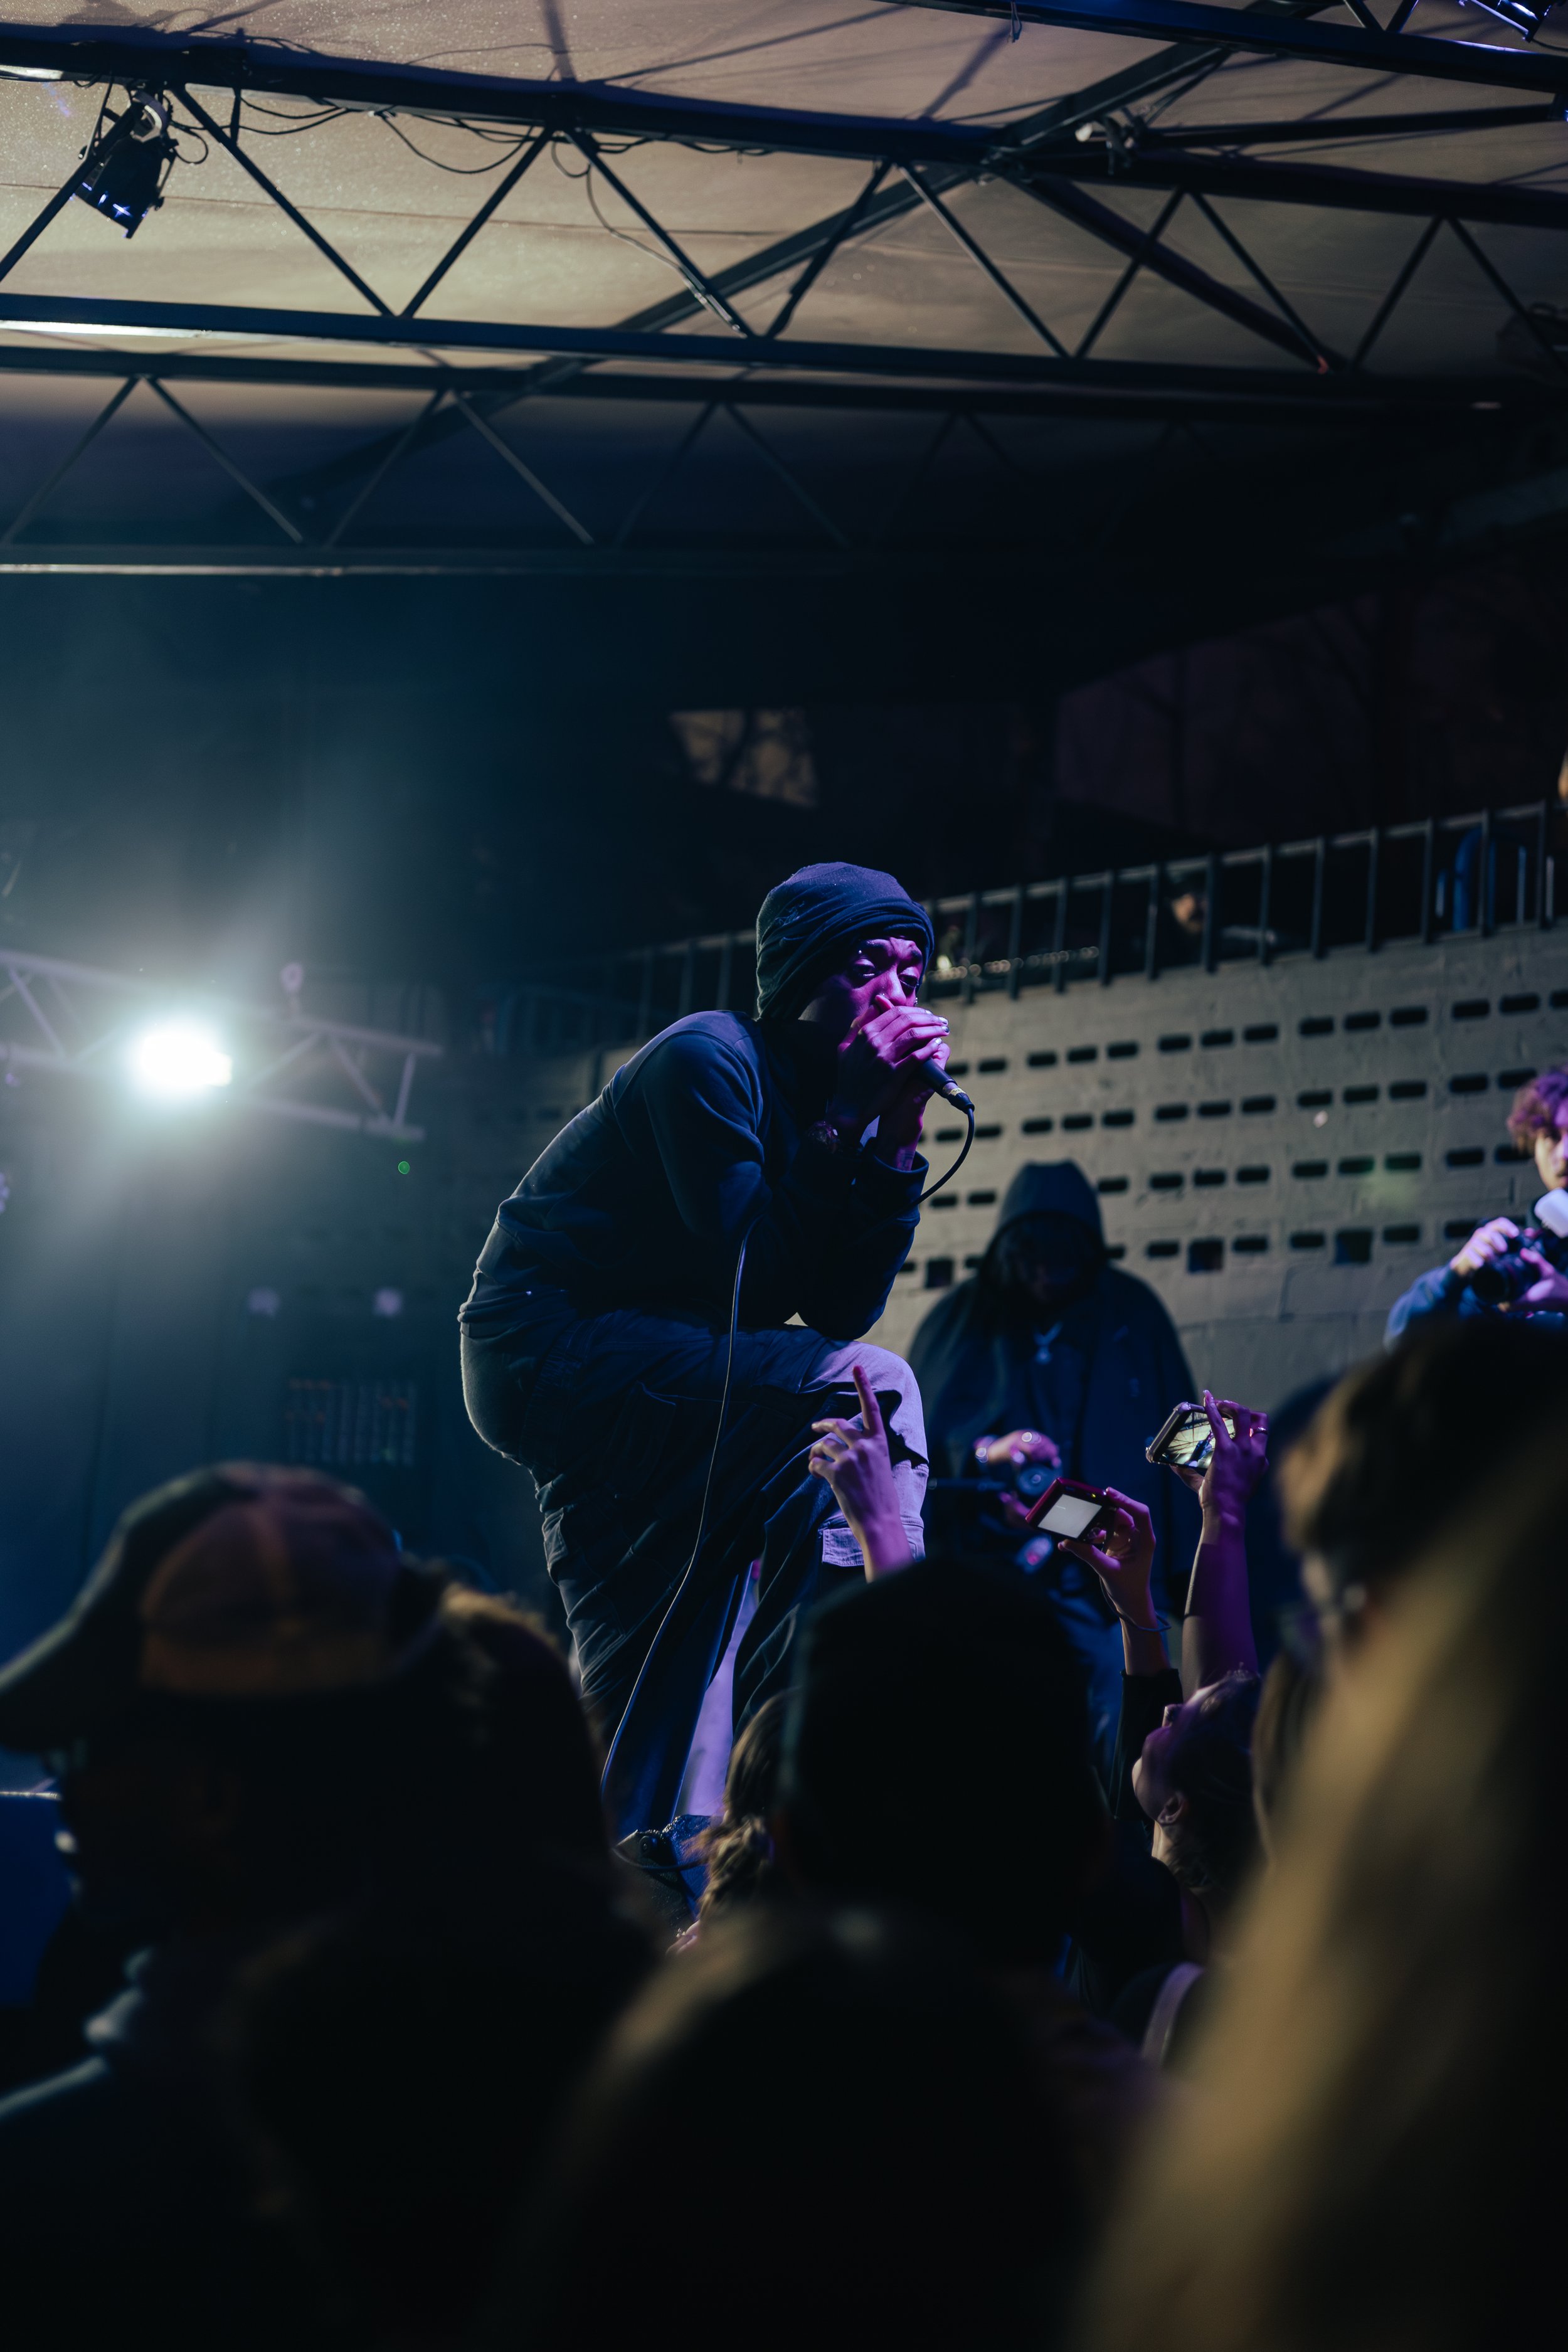  Tyler Brooks, the British rapper known as Skaiwater, looks out onto the moshing crowd. 